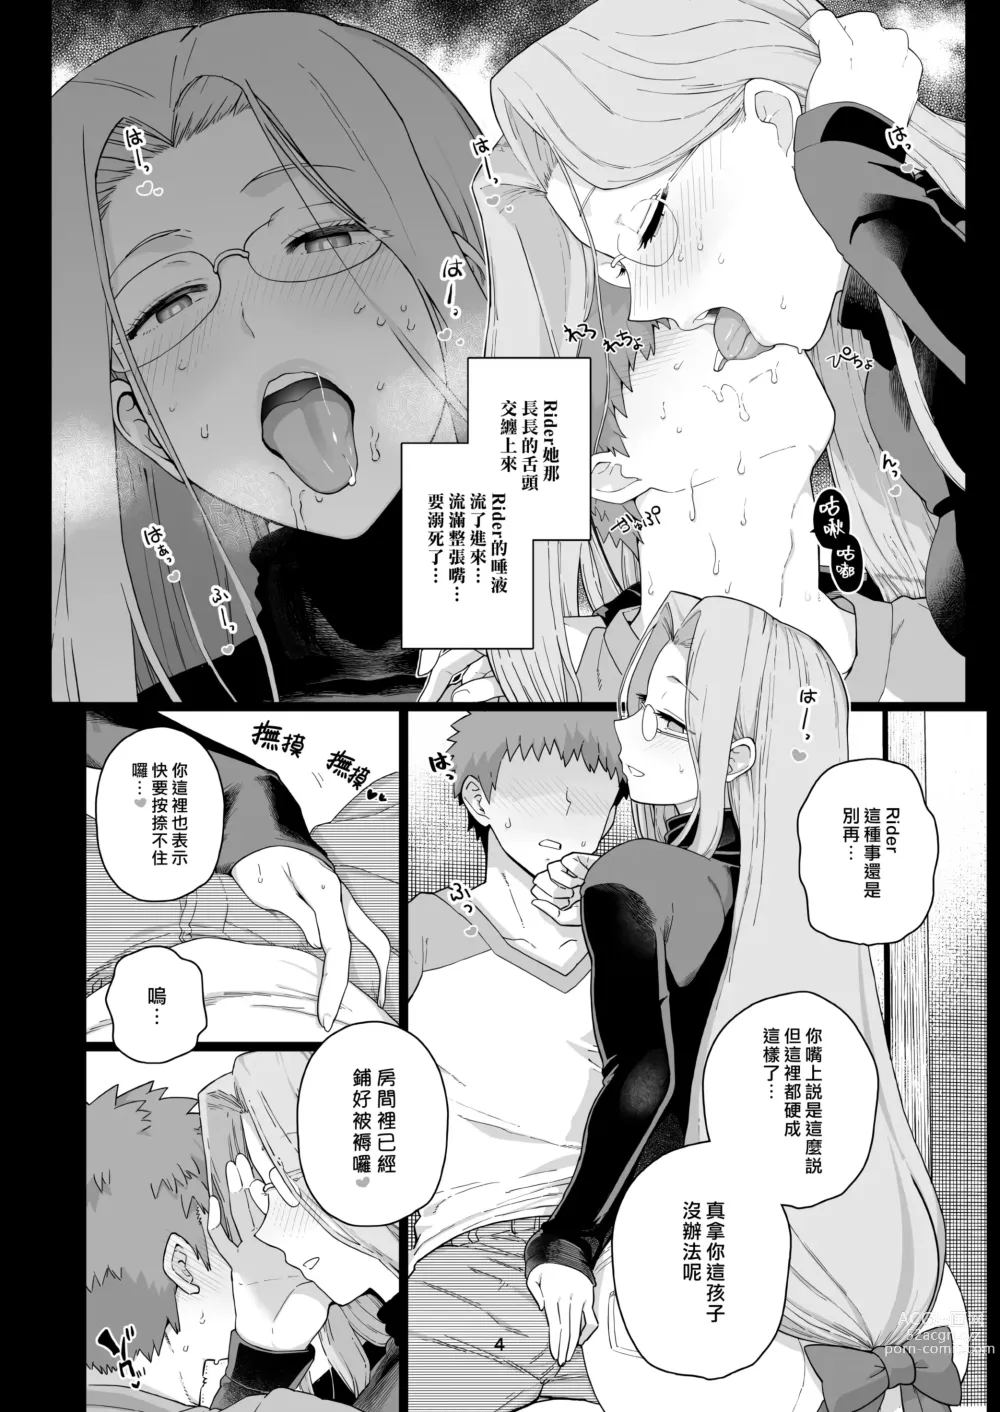 Page 7 of doujinshi Rider小姐的偷吃 (decensored)